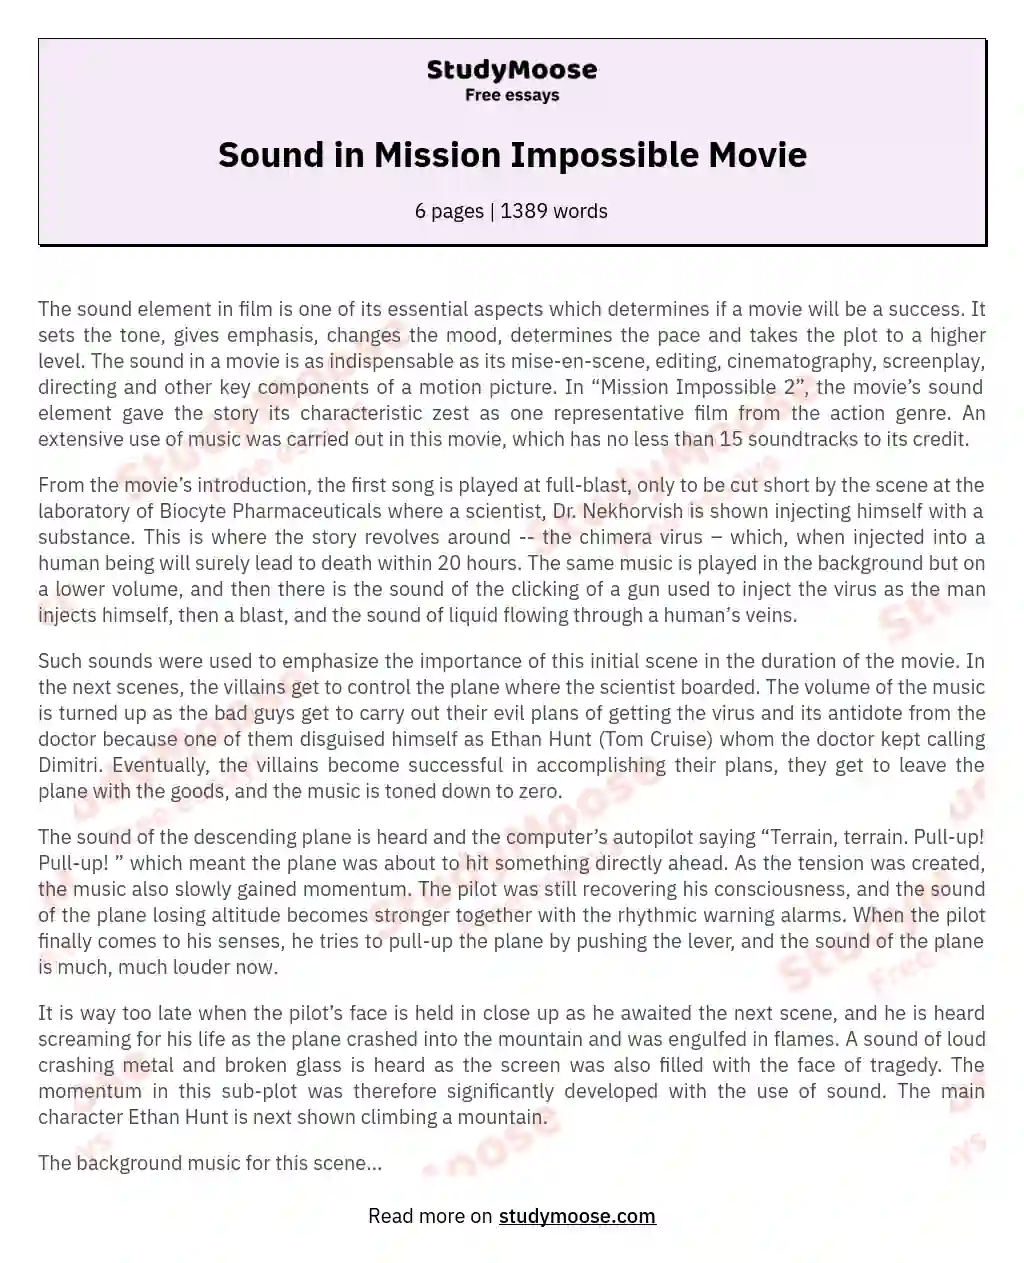 Sound in Mission Impossible Movie